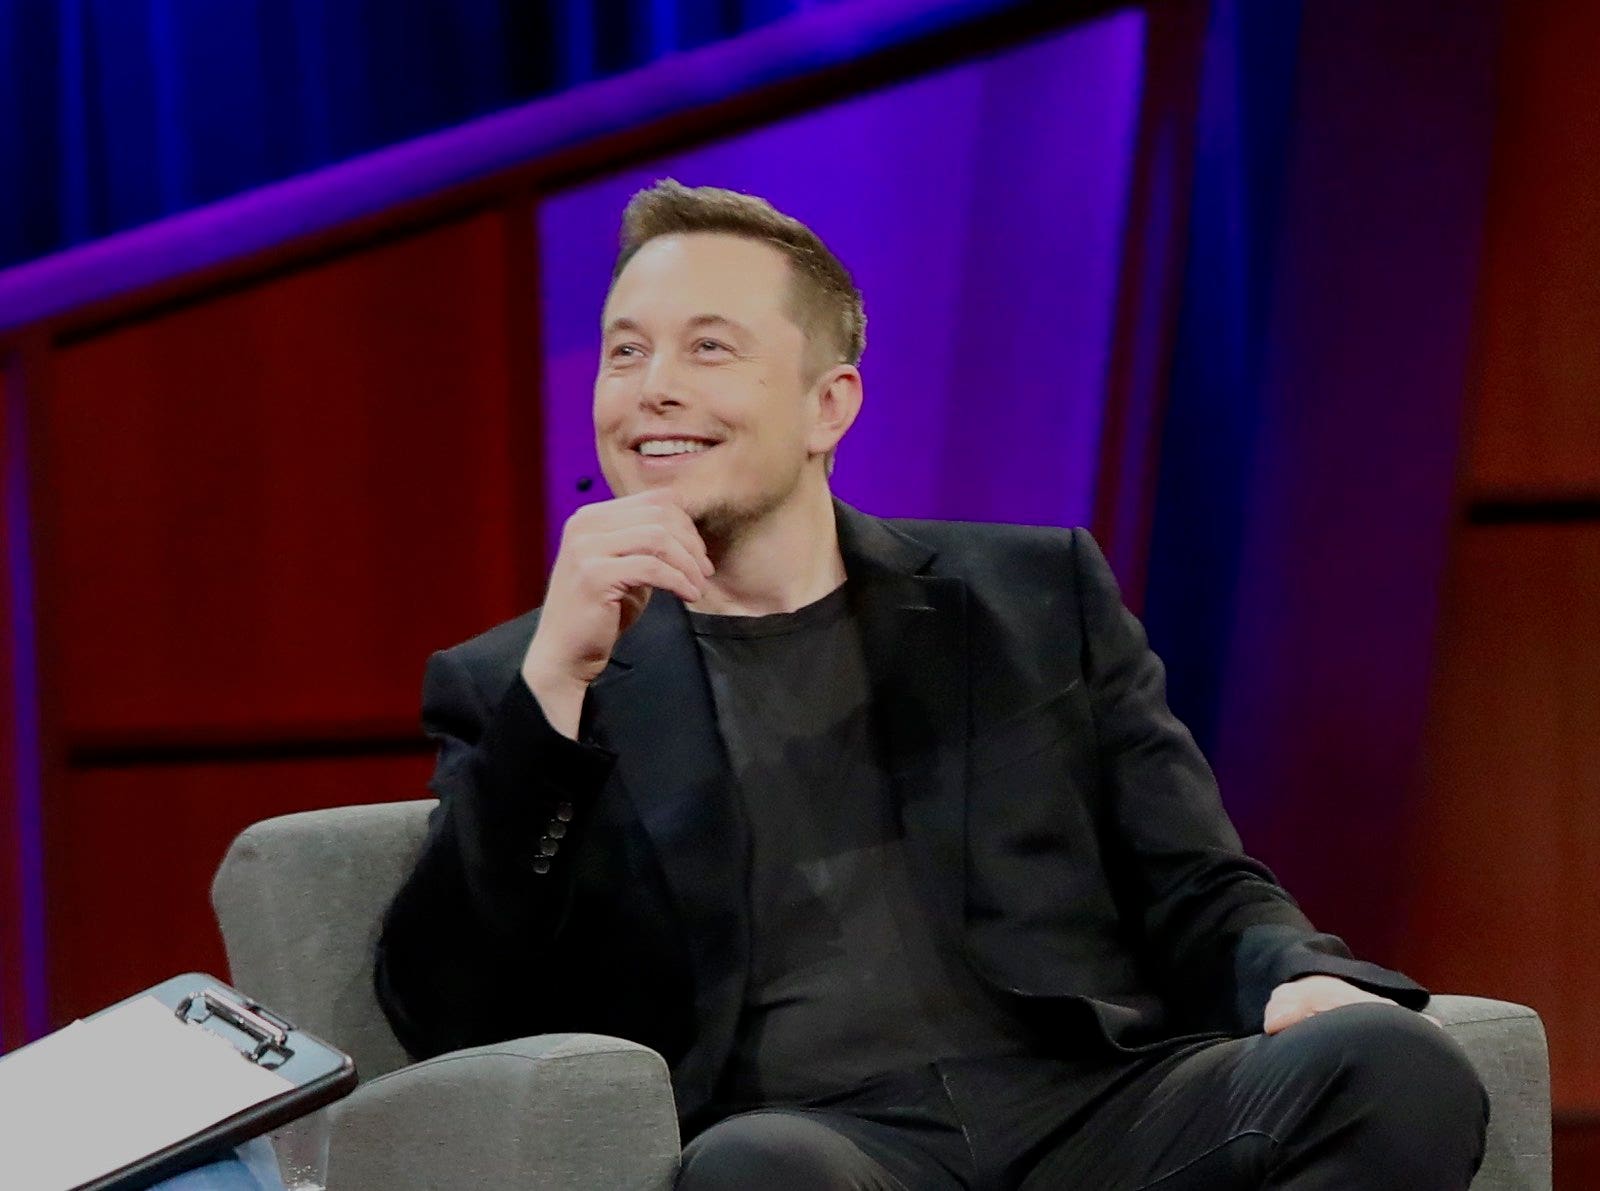 Elon Musk Sells More Tesla Stock: Why Twitter Shares Are Rising Today